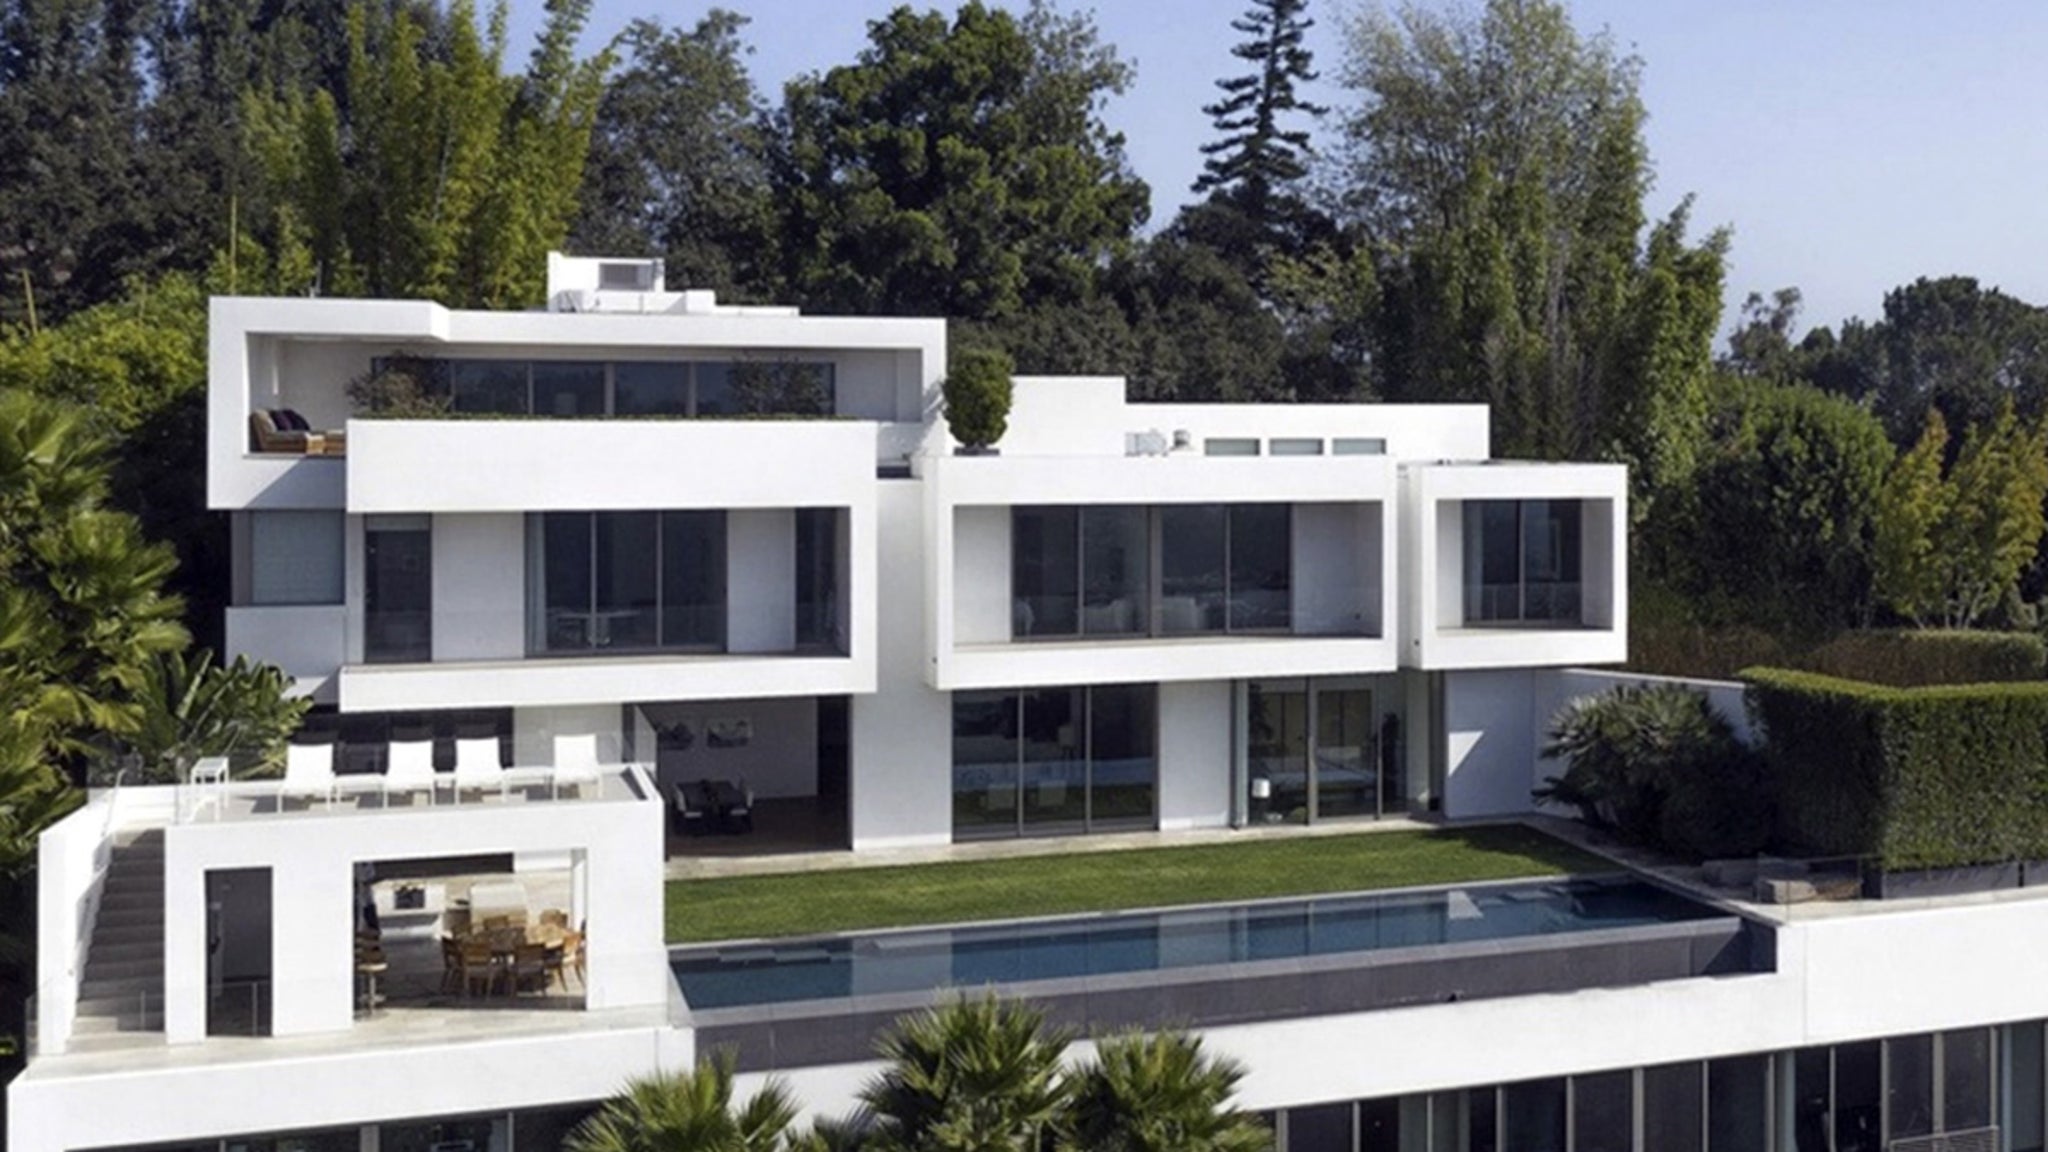 Trevor Noah’s $ 27.5 million Bel-Air mansion is a palace of daily shows